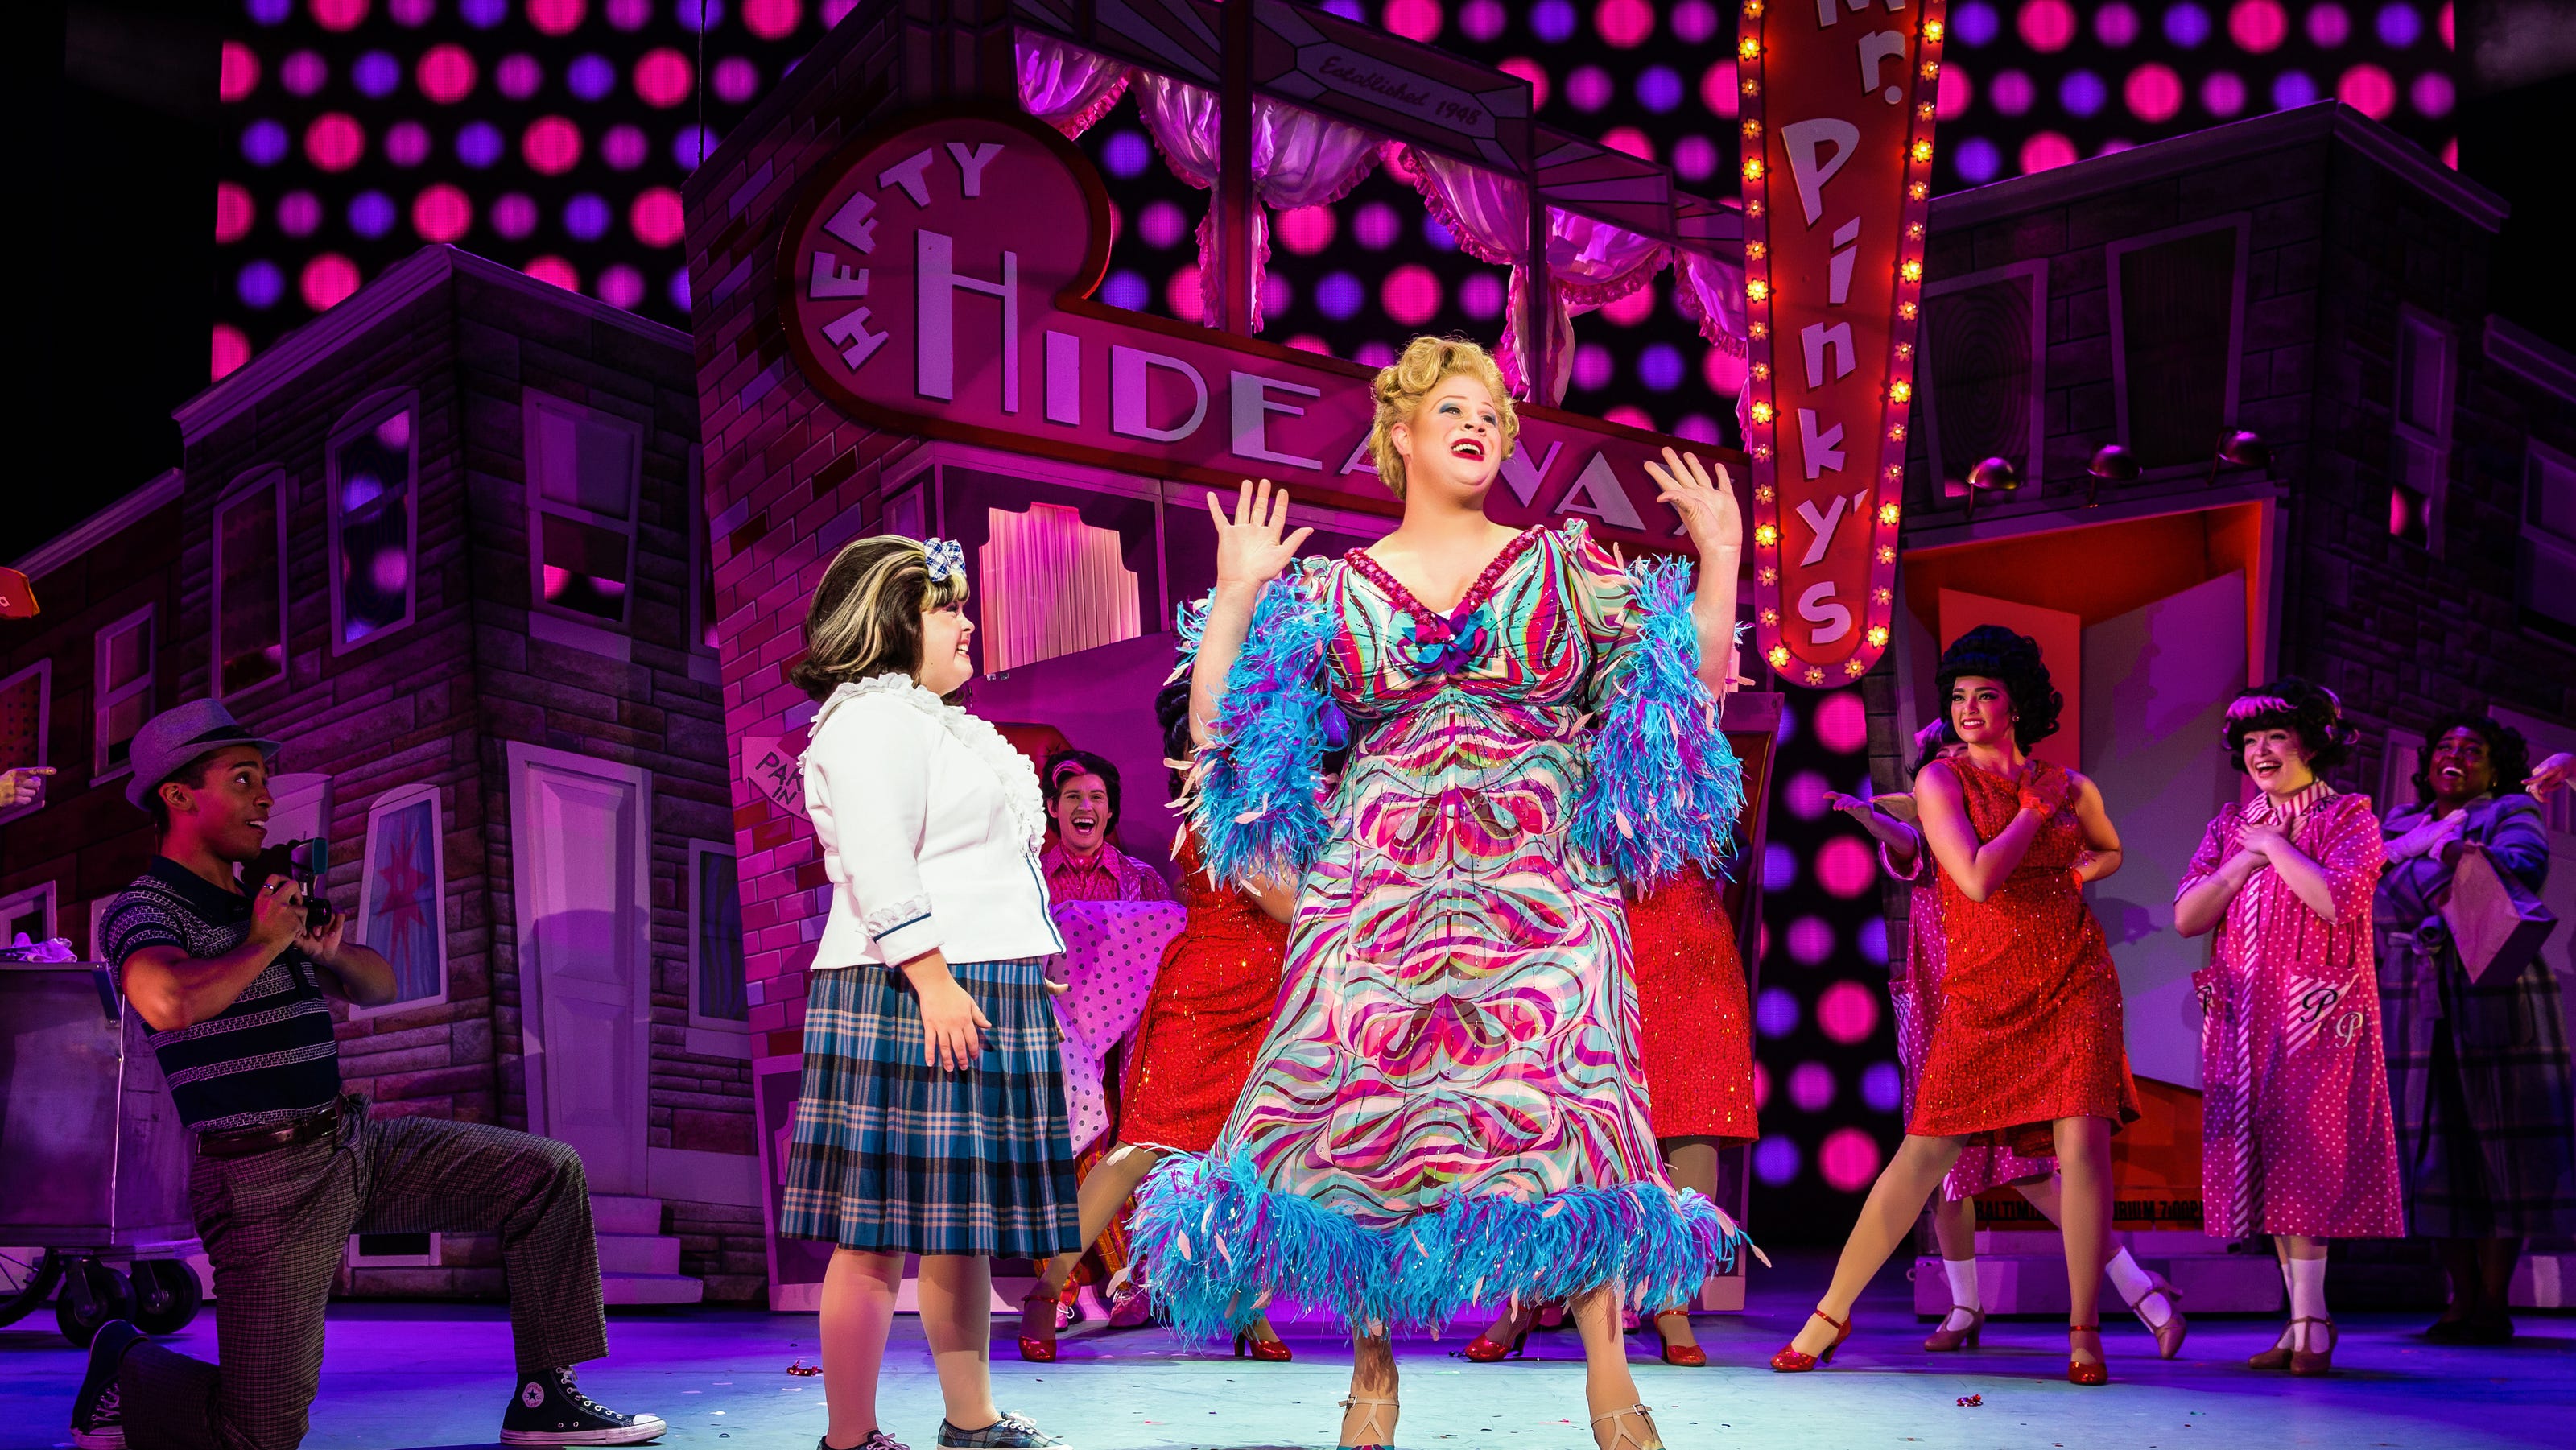   
																Stark County native sees Edna role in ‘Hairspray’ as ‘greatest gift’ 
															 